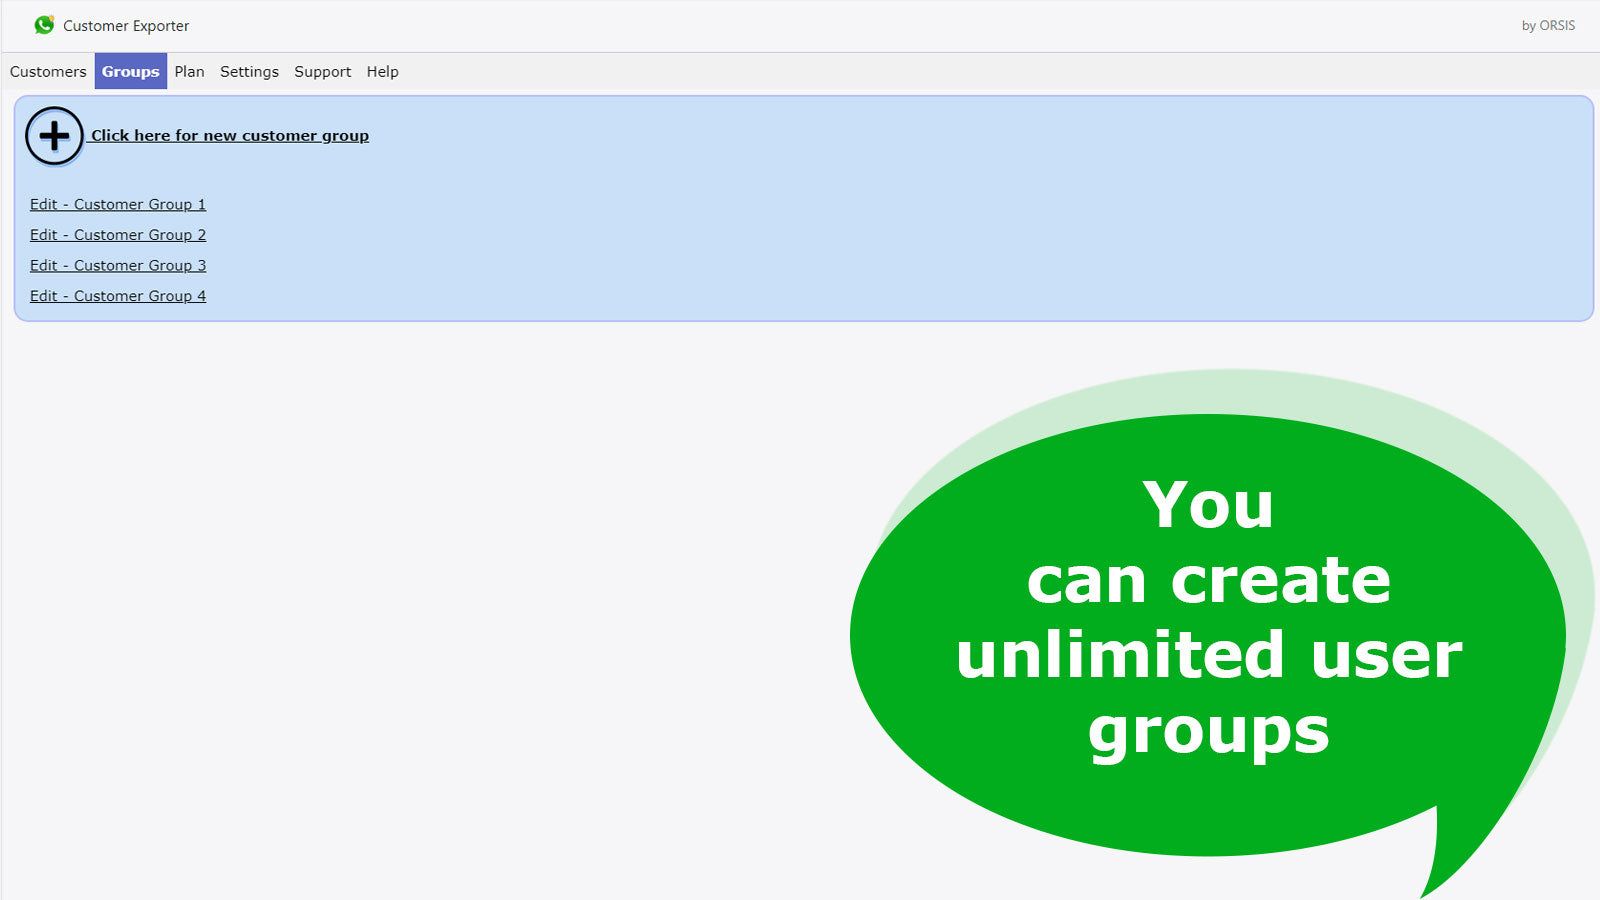 You can create unlimited user groups